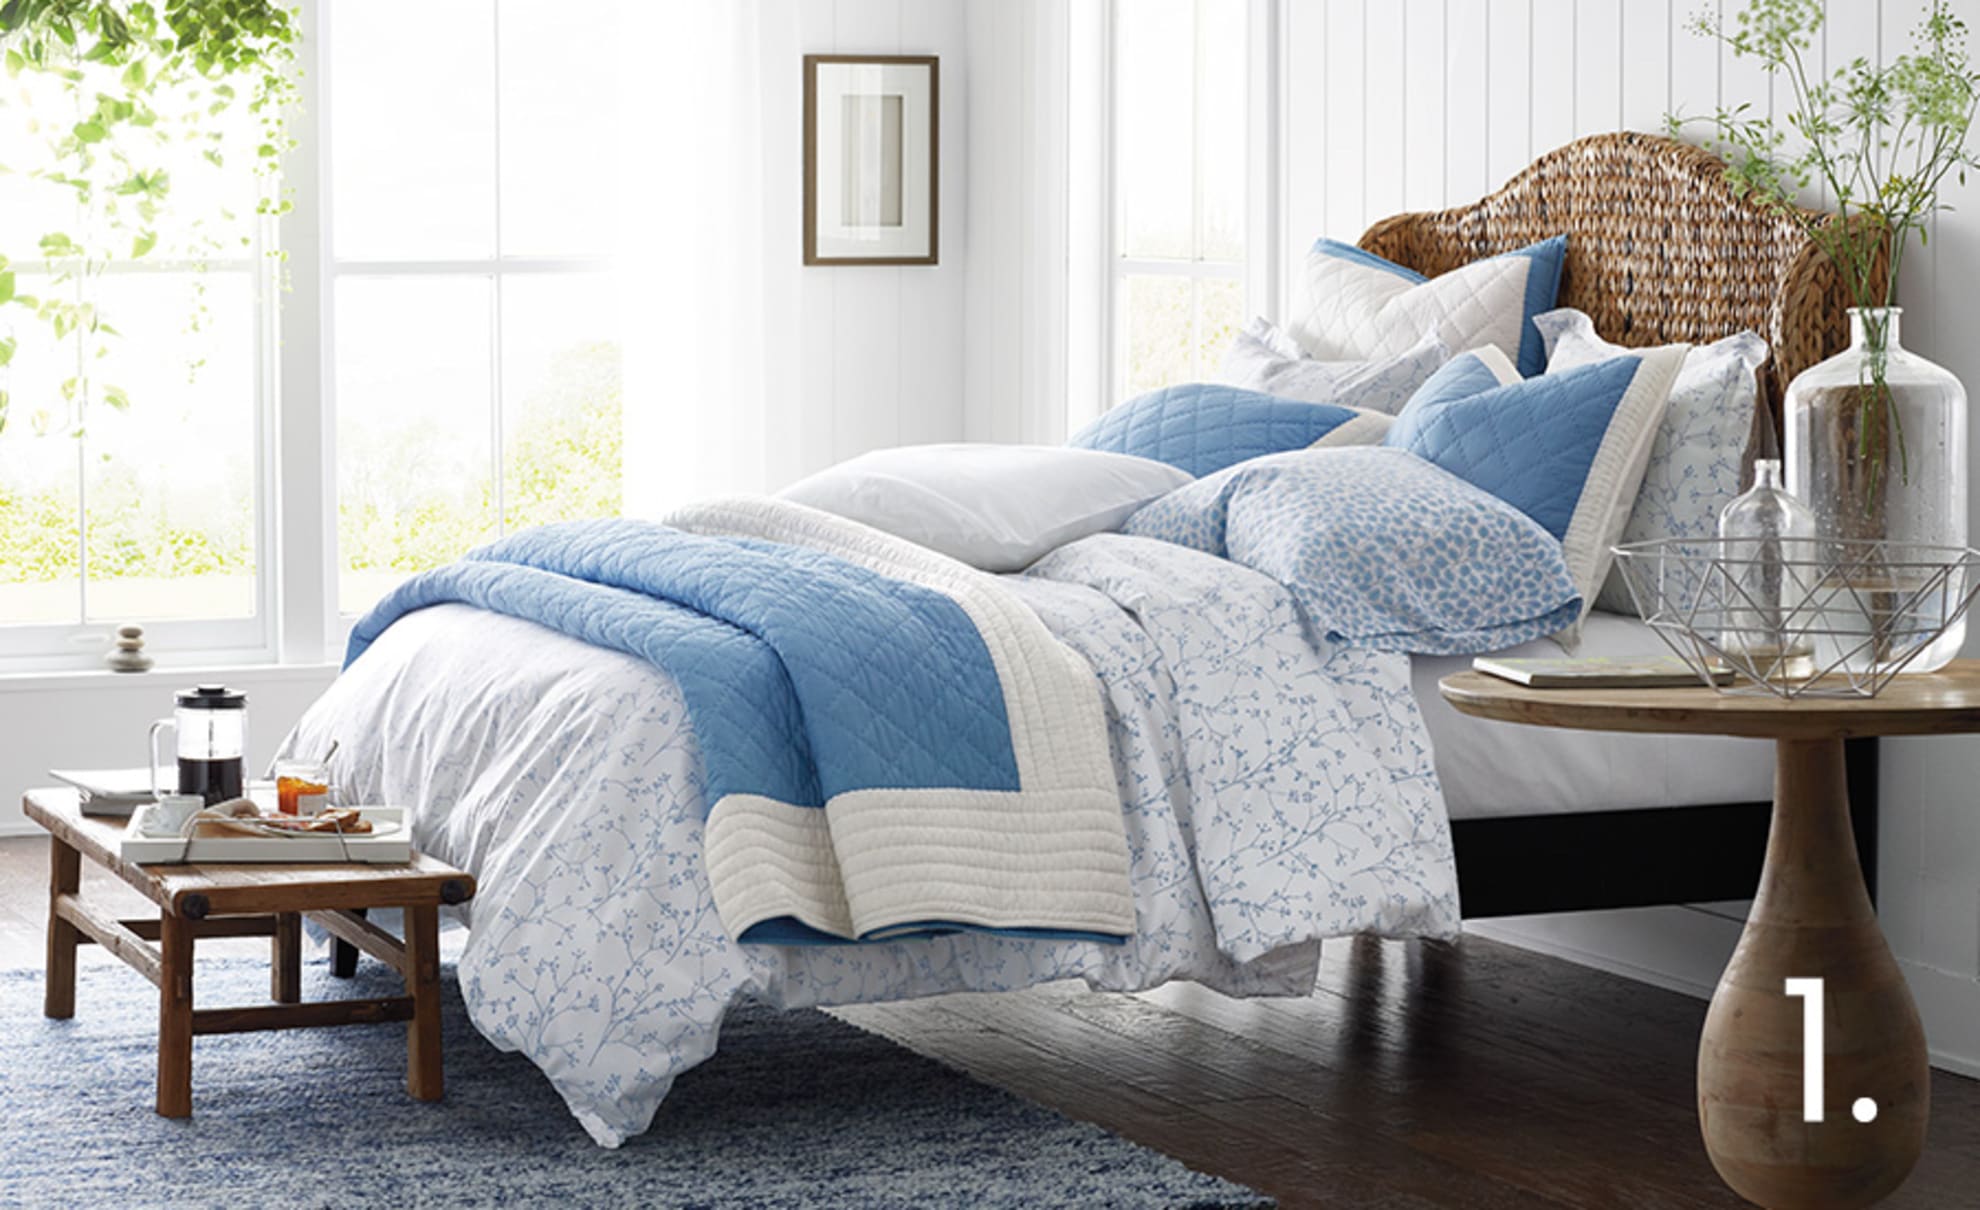 How Can I Choose The Right Bedspread To Match My Decor?